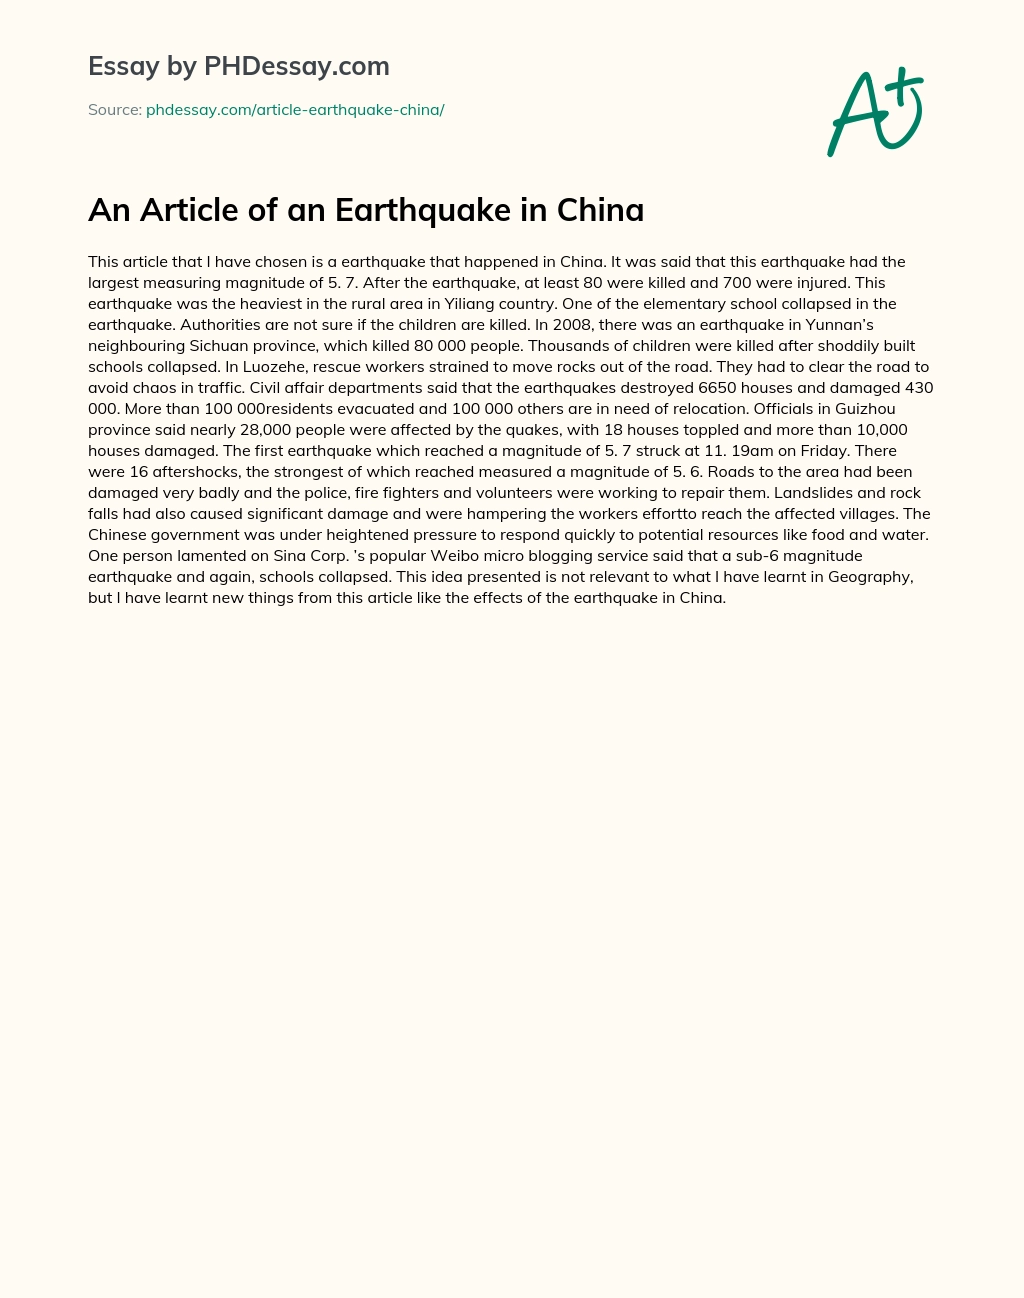 An Article of an Earthquake in China essay